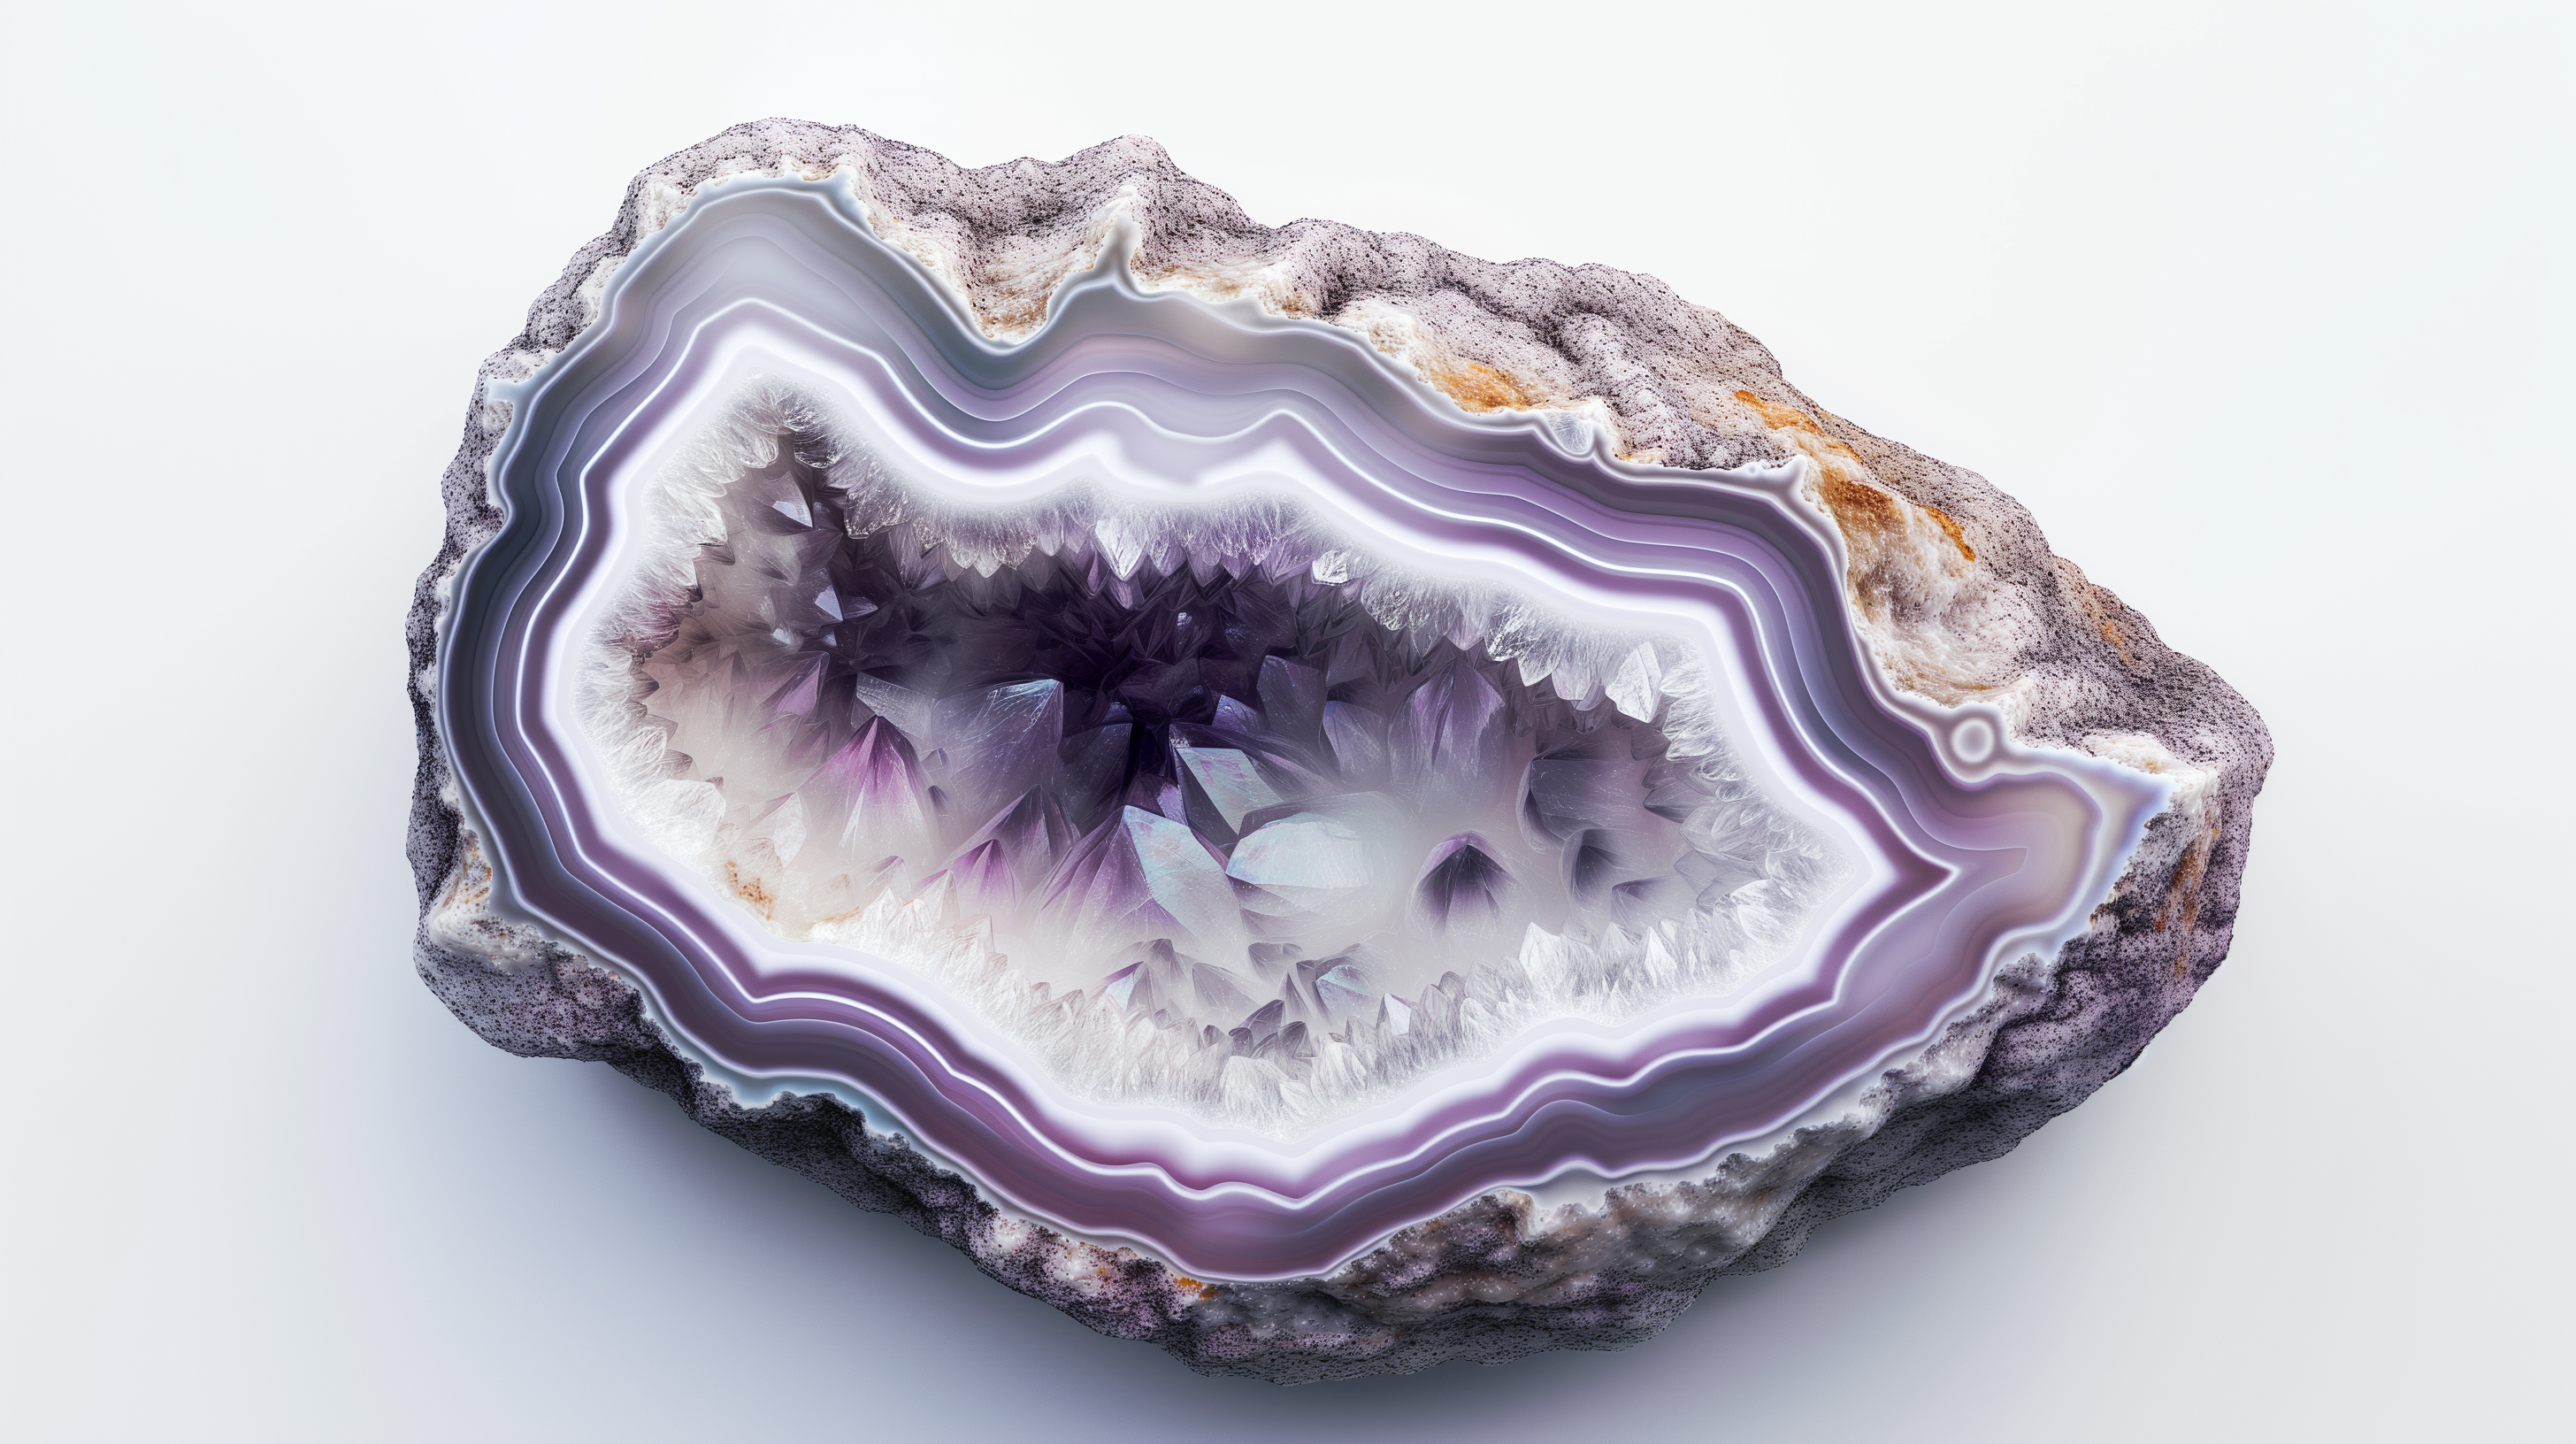 HD wallpaper of a beautiful purple and white geode crystal on a clean background, perfect as a vibrant desktop wallpaper or background.